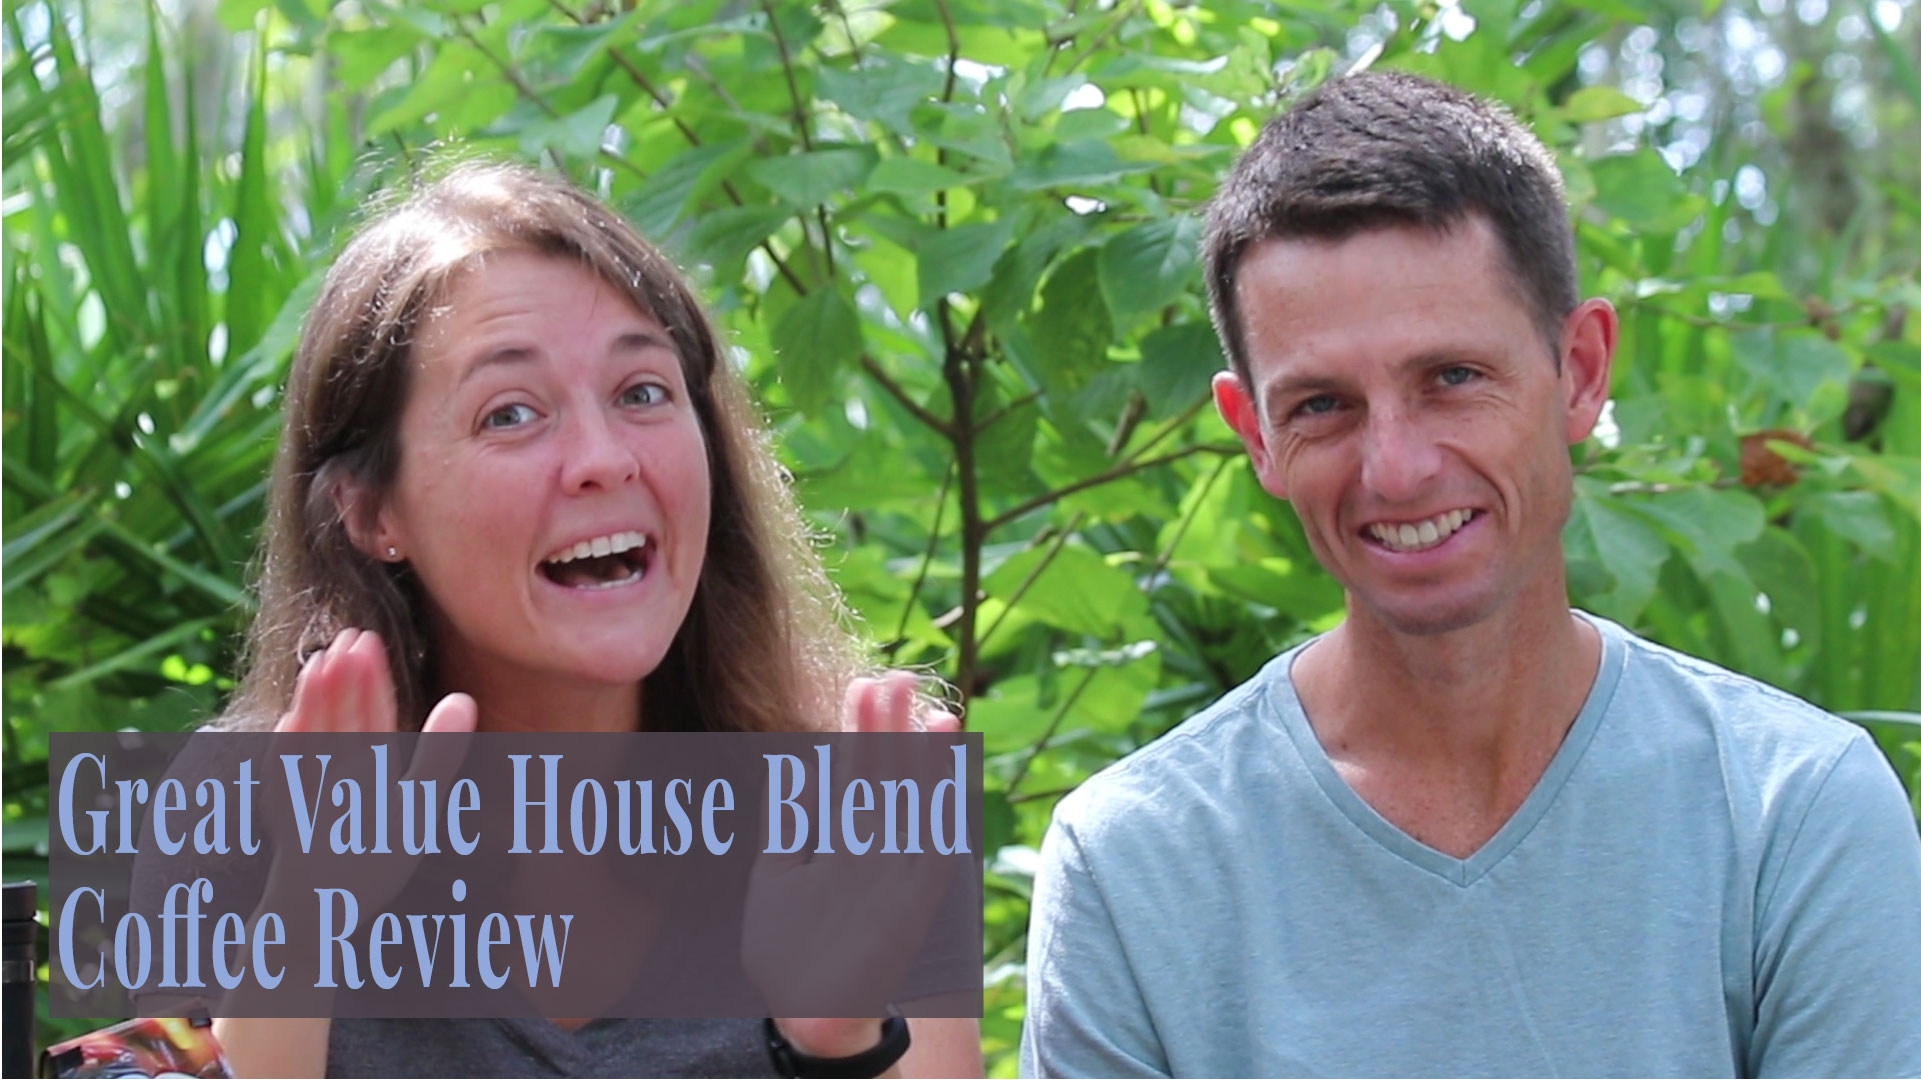 Video thumbnail for the review of Great Value House Blend coffee.